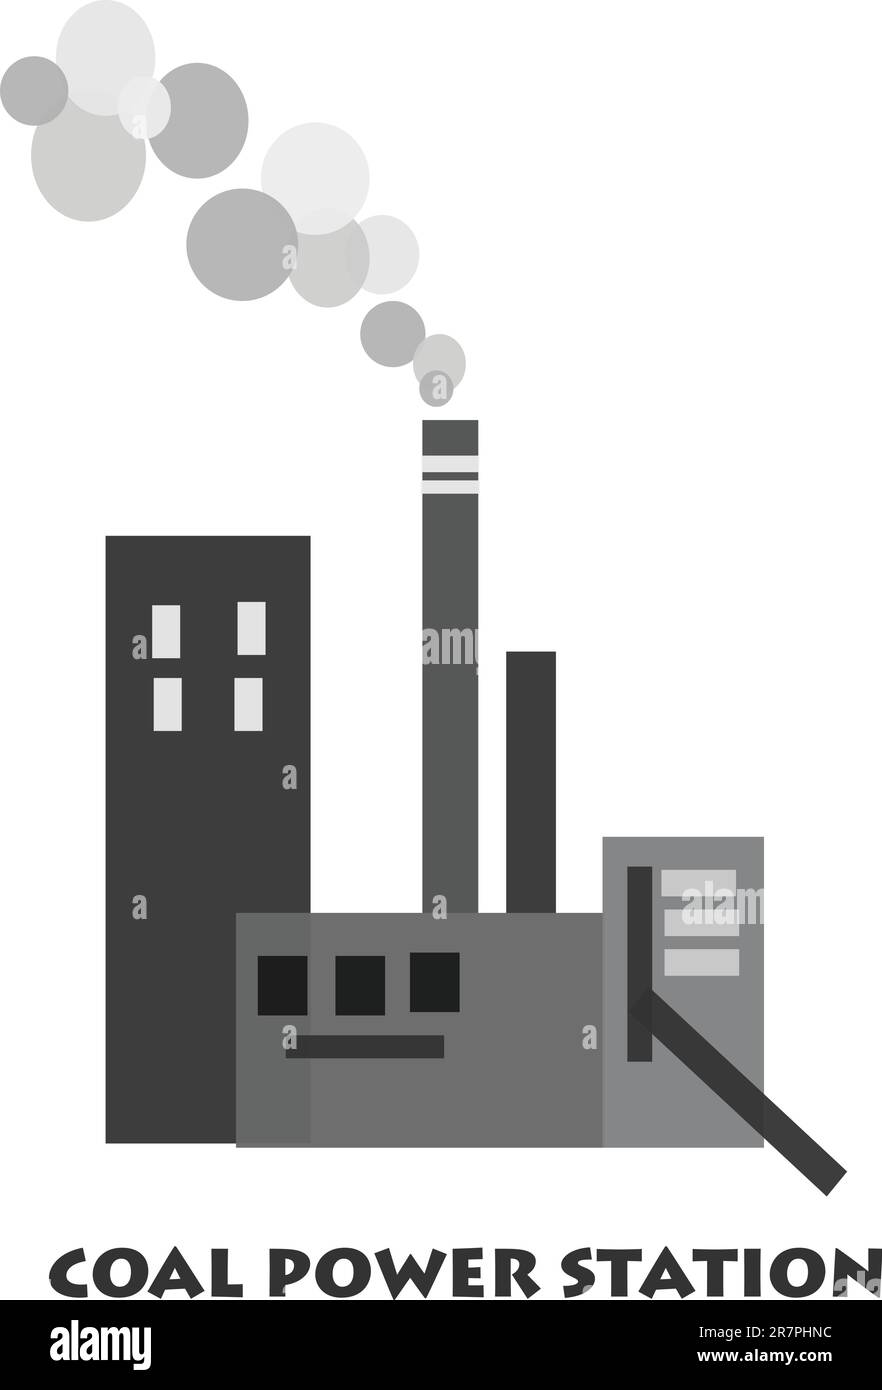 Pollution from coal power station - vector Stock Vector